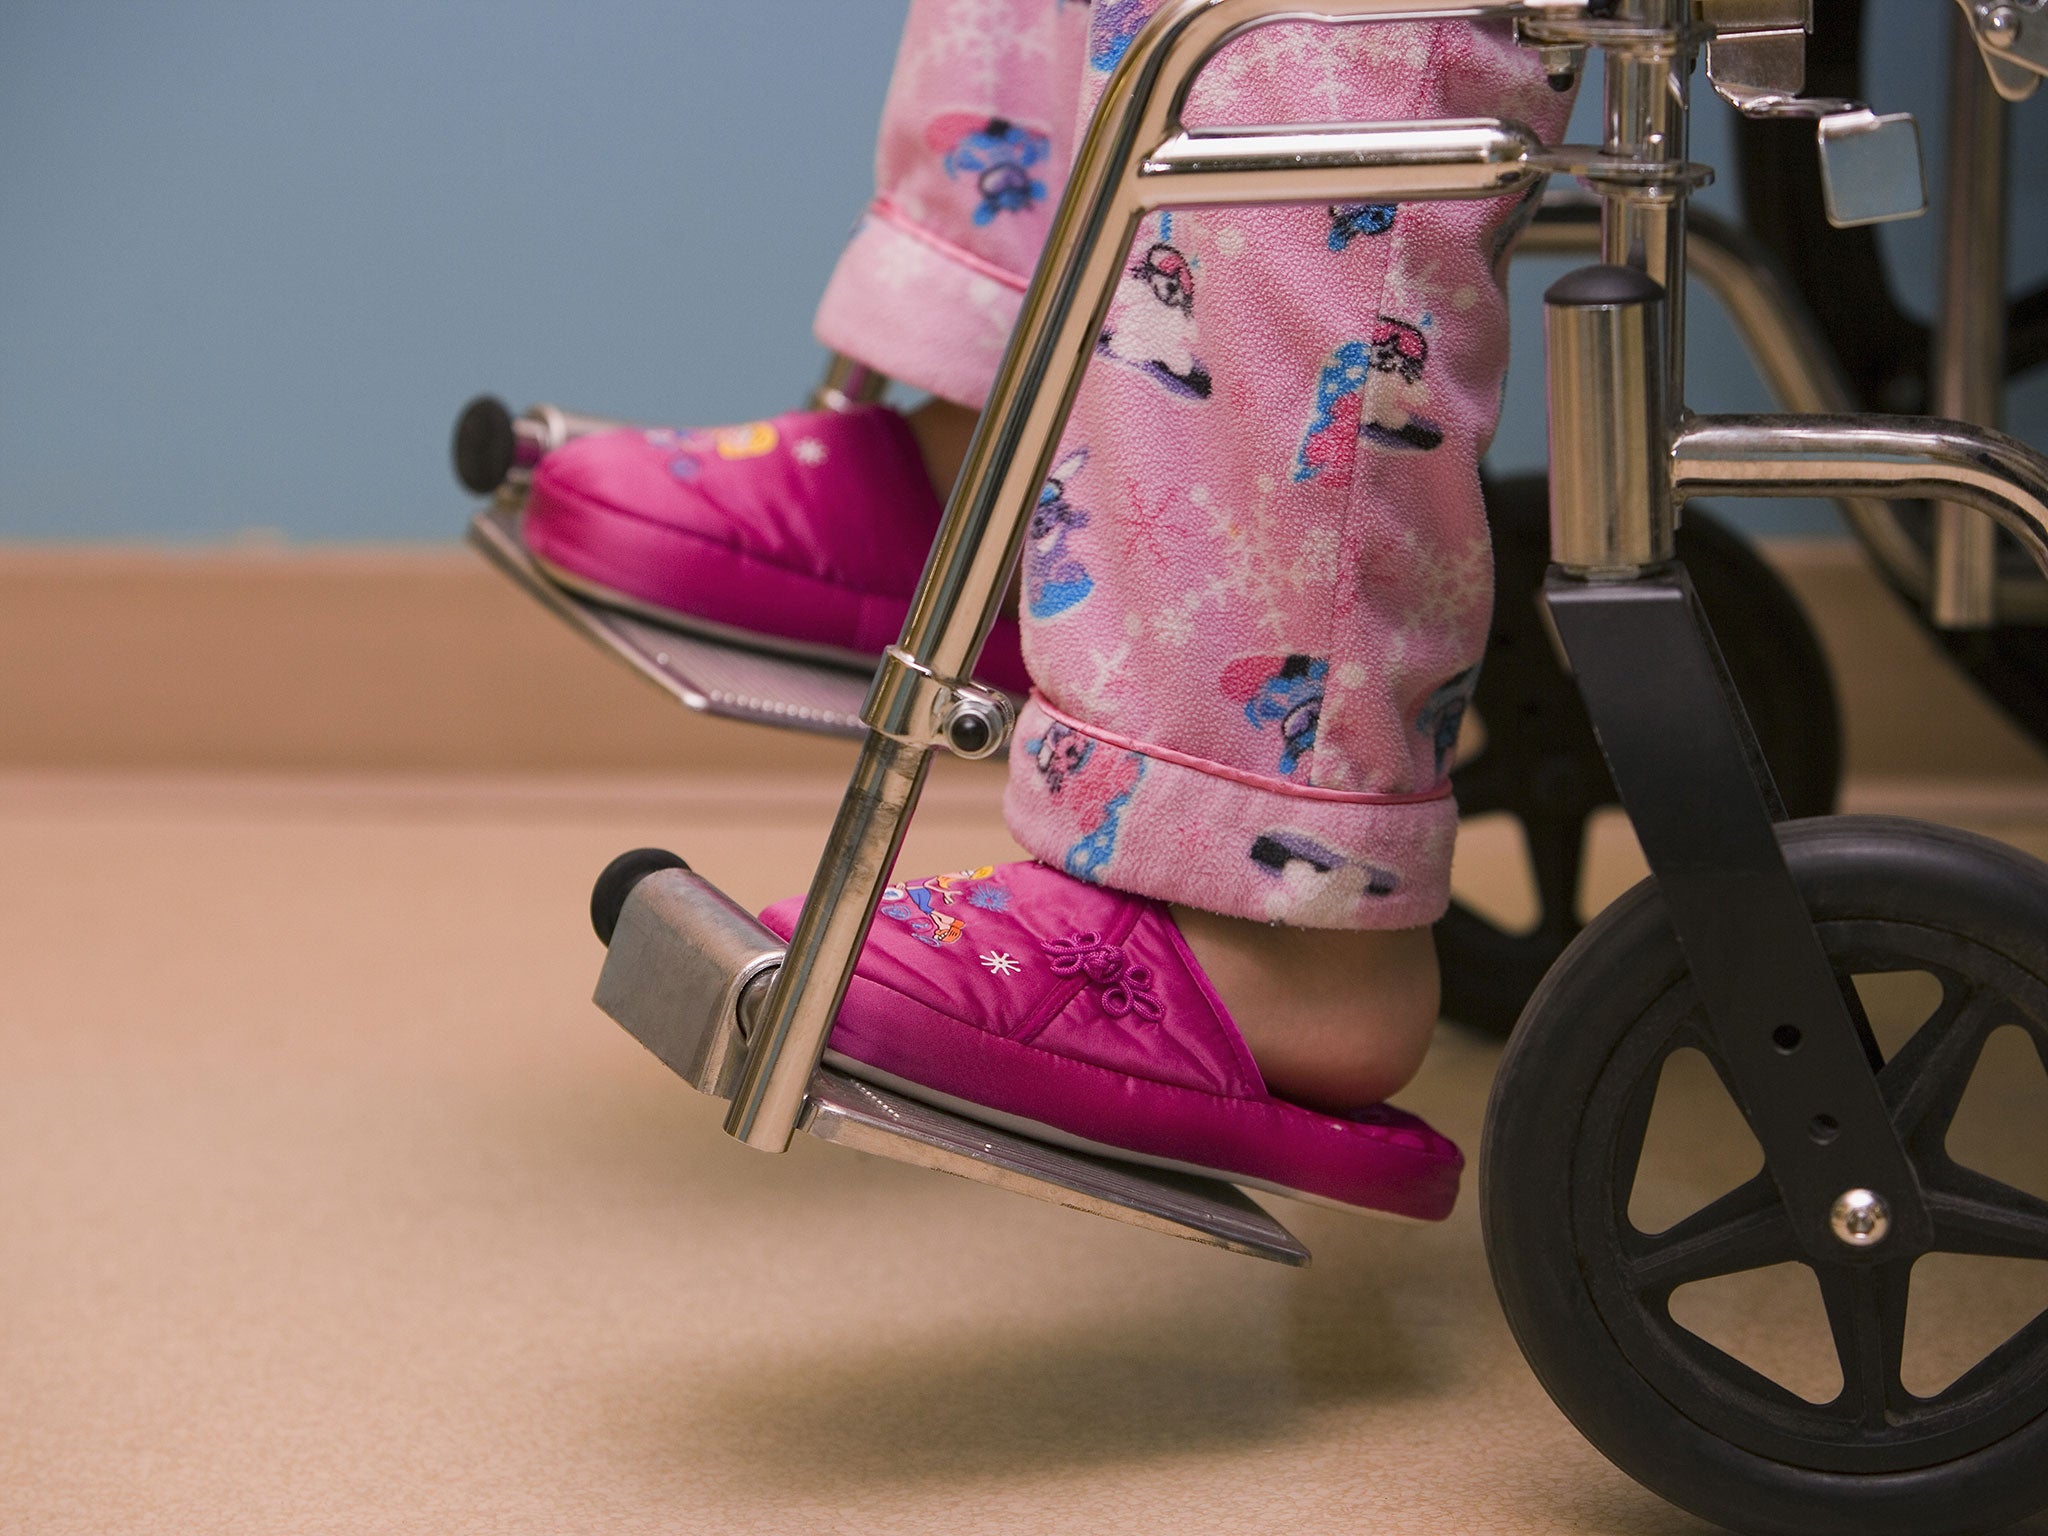 The Australian Human Rights Commission says that sterilisation procedures are most often carried out on female children with intellectual disabilities